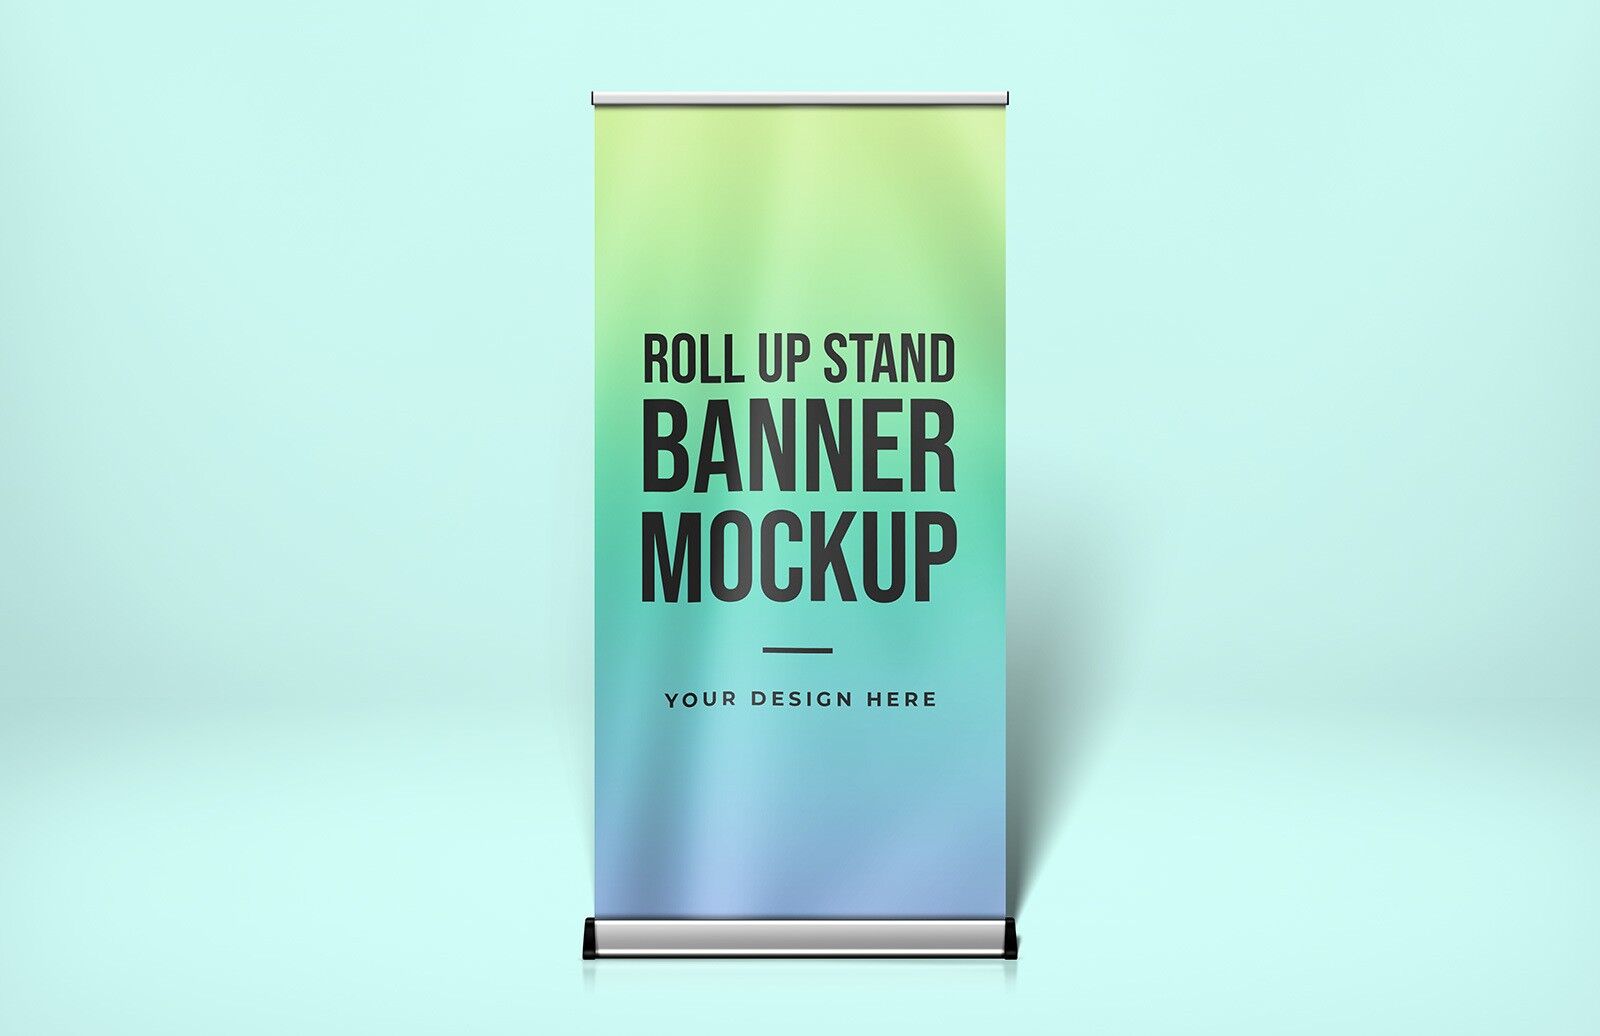 Single Roll up Stand Banner Mockup FREE PSD